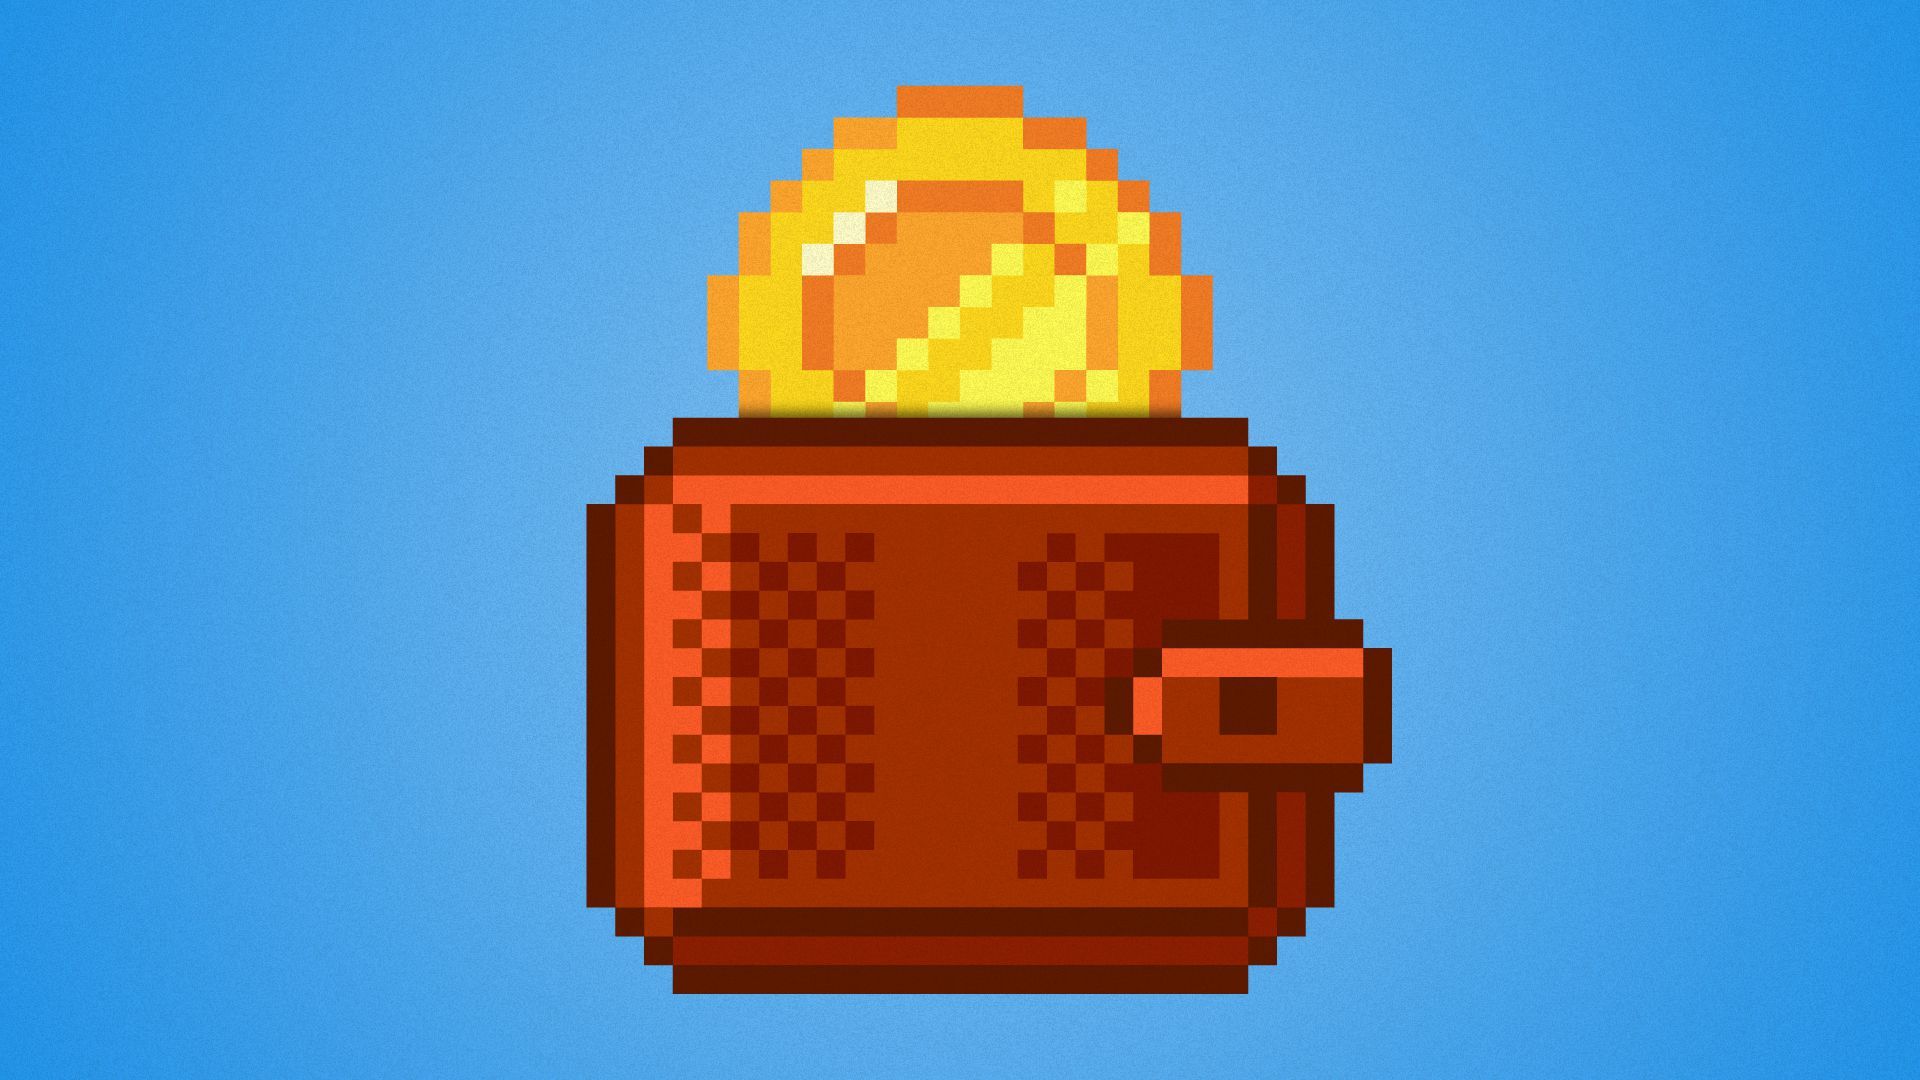 Illustration of a pixelated coin sticking out of a pixelated wallet.